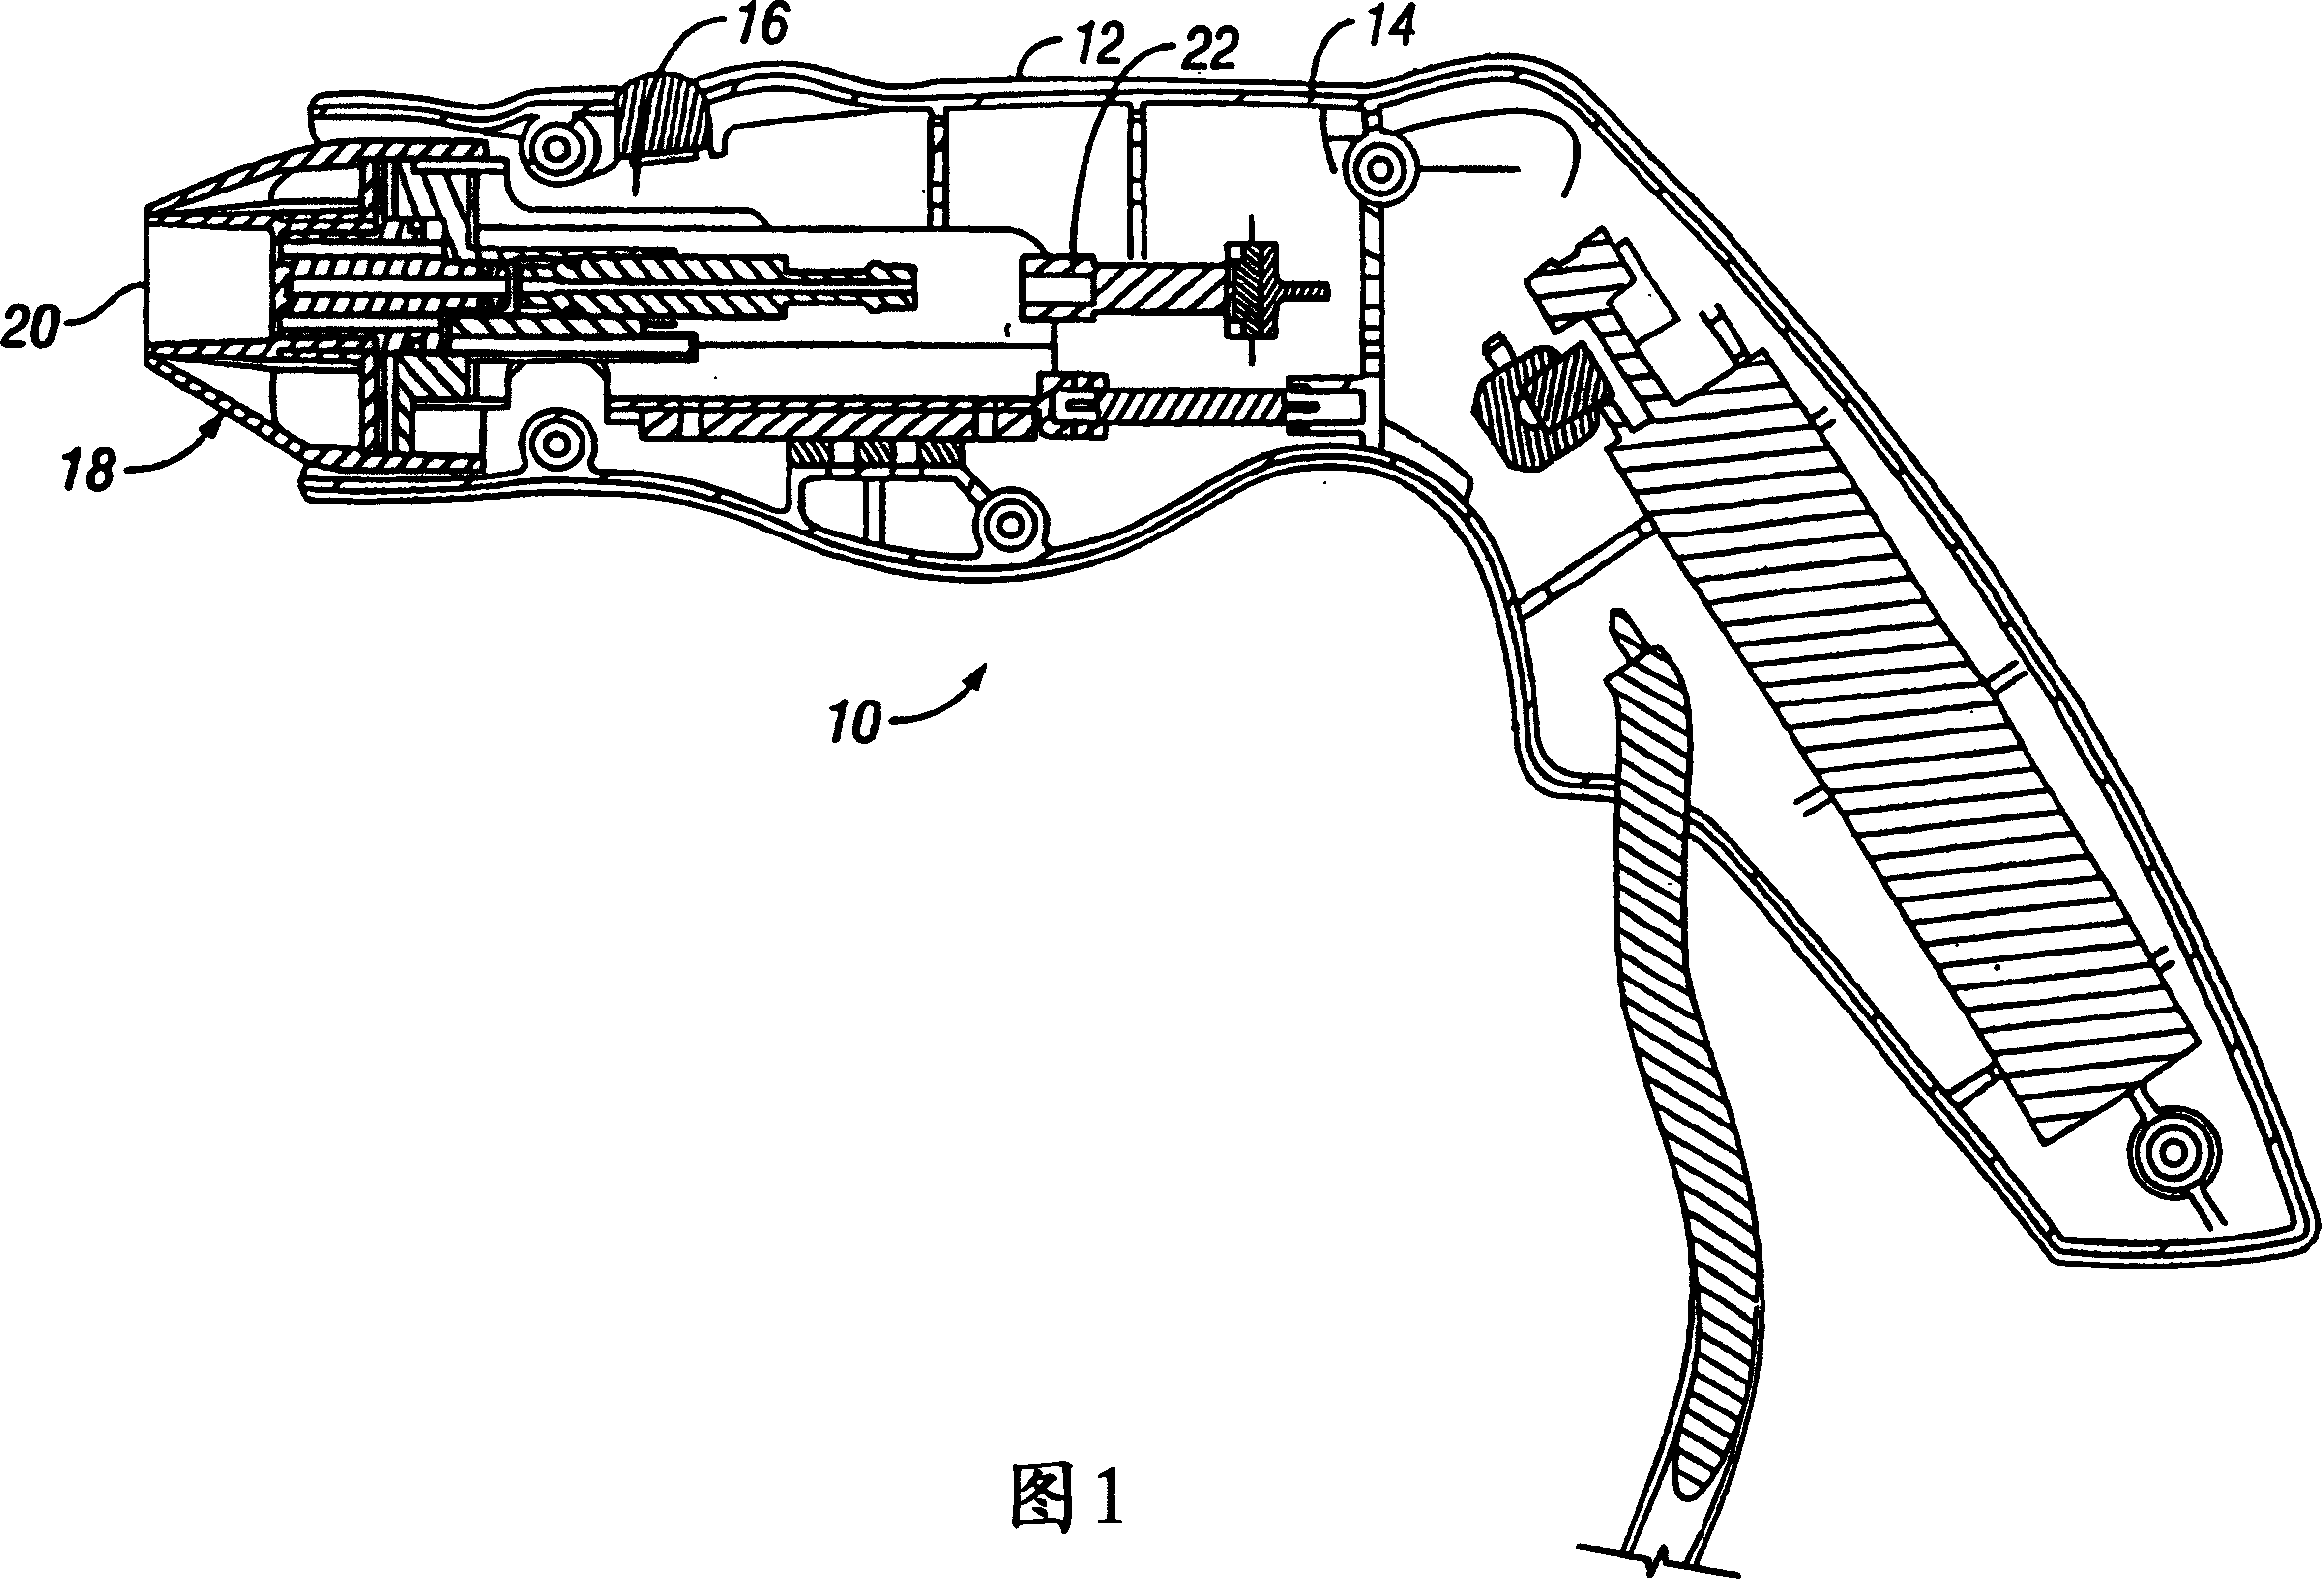 Handpiece for RF treatment of tissue